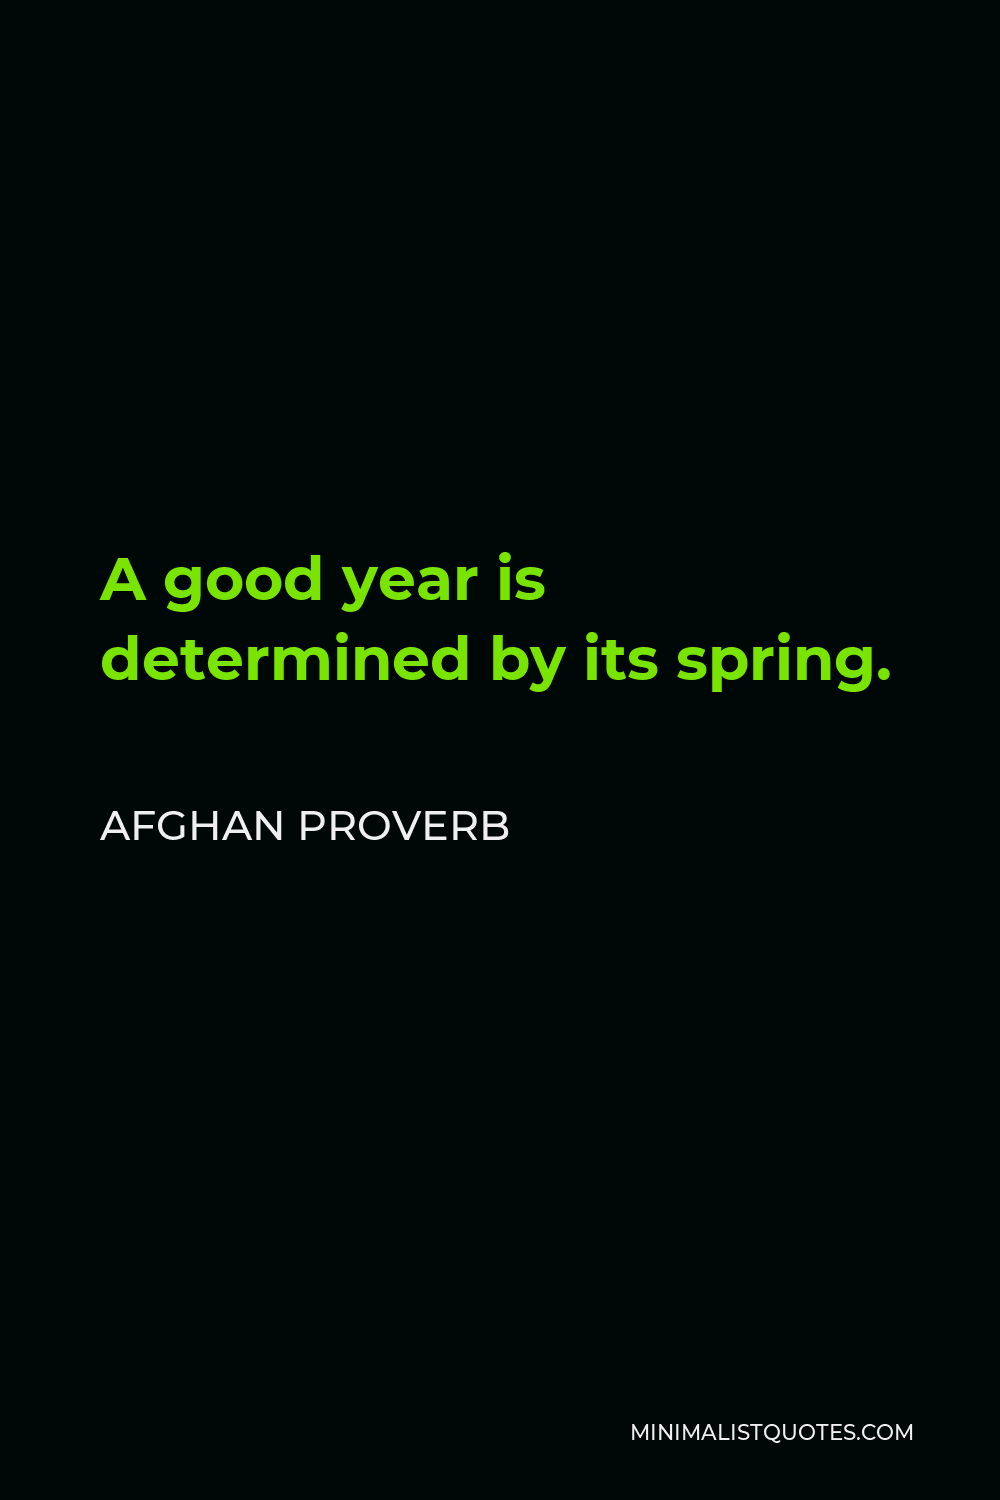 Afghan Proverb Quote - A good year is determined by its spring.